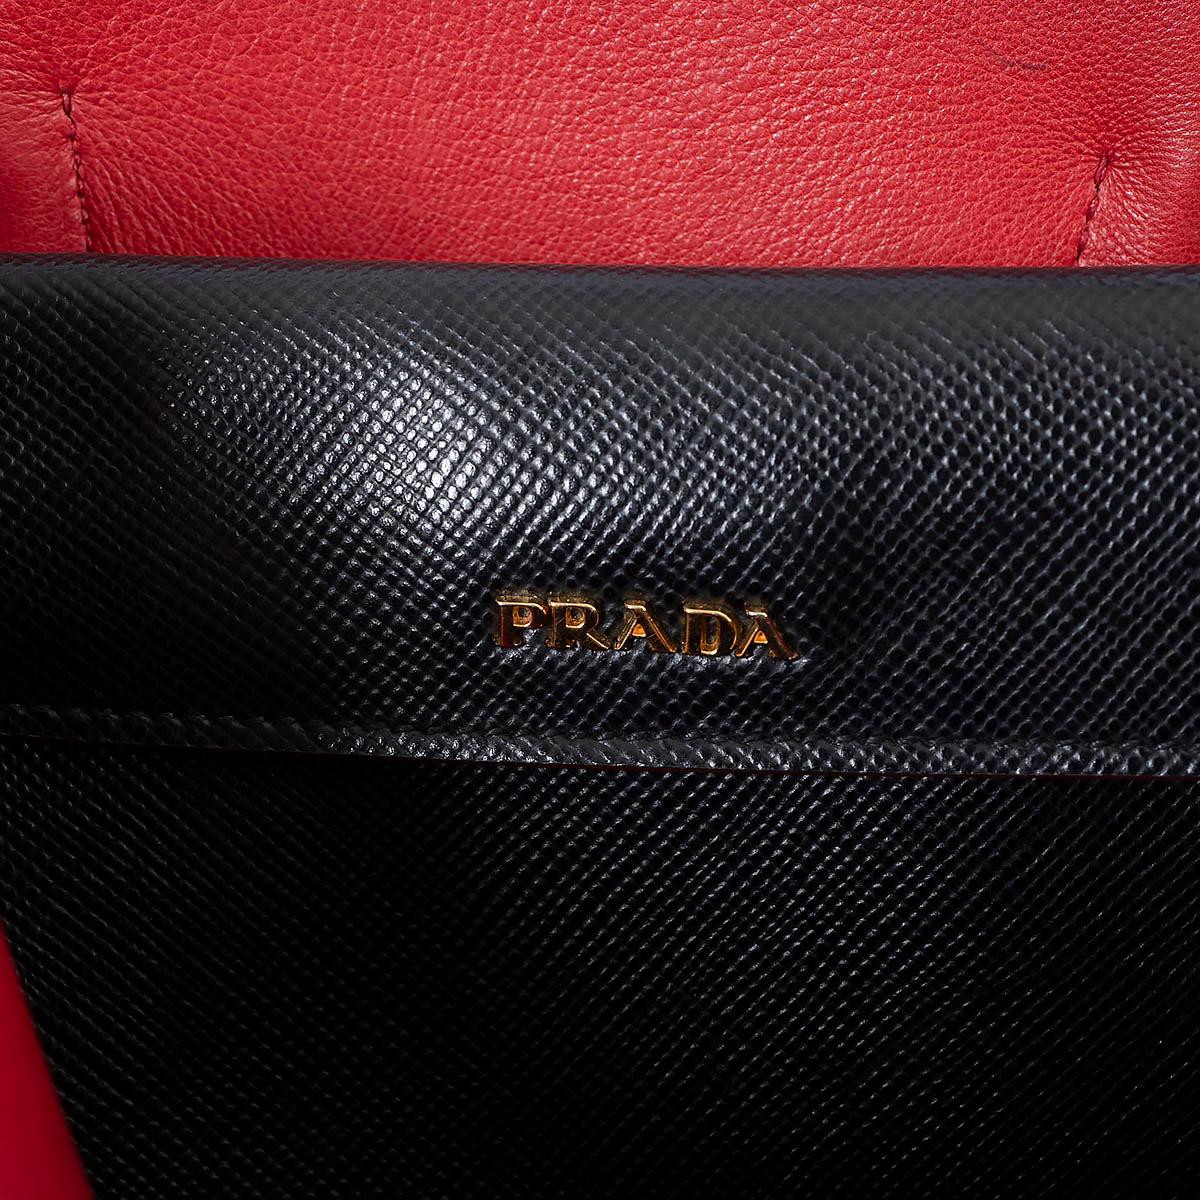 PRADA black / Fuoco red Saffiano leather LARGE DOUBLE Tote Bag For Sale 1